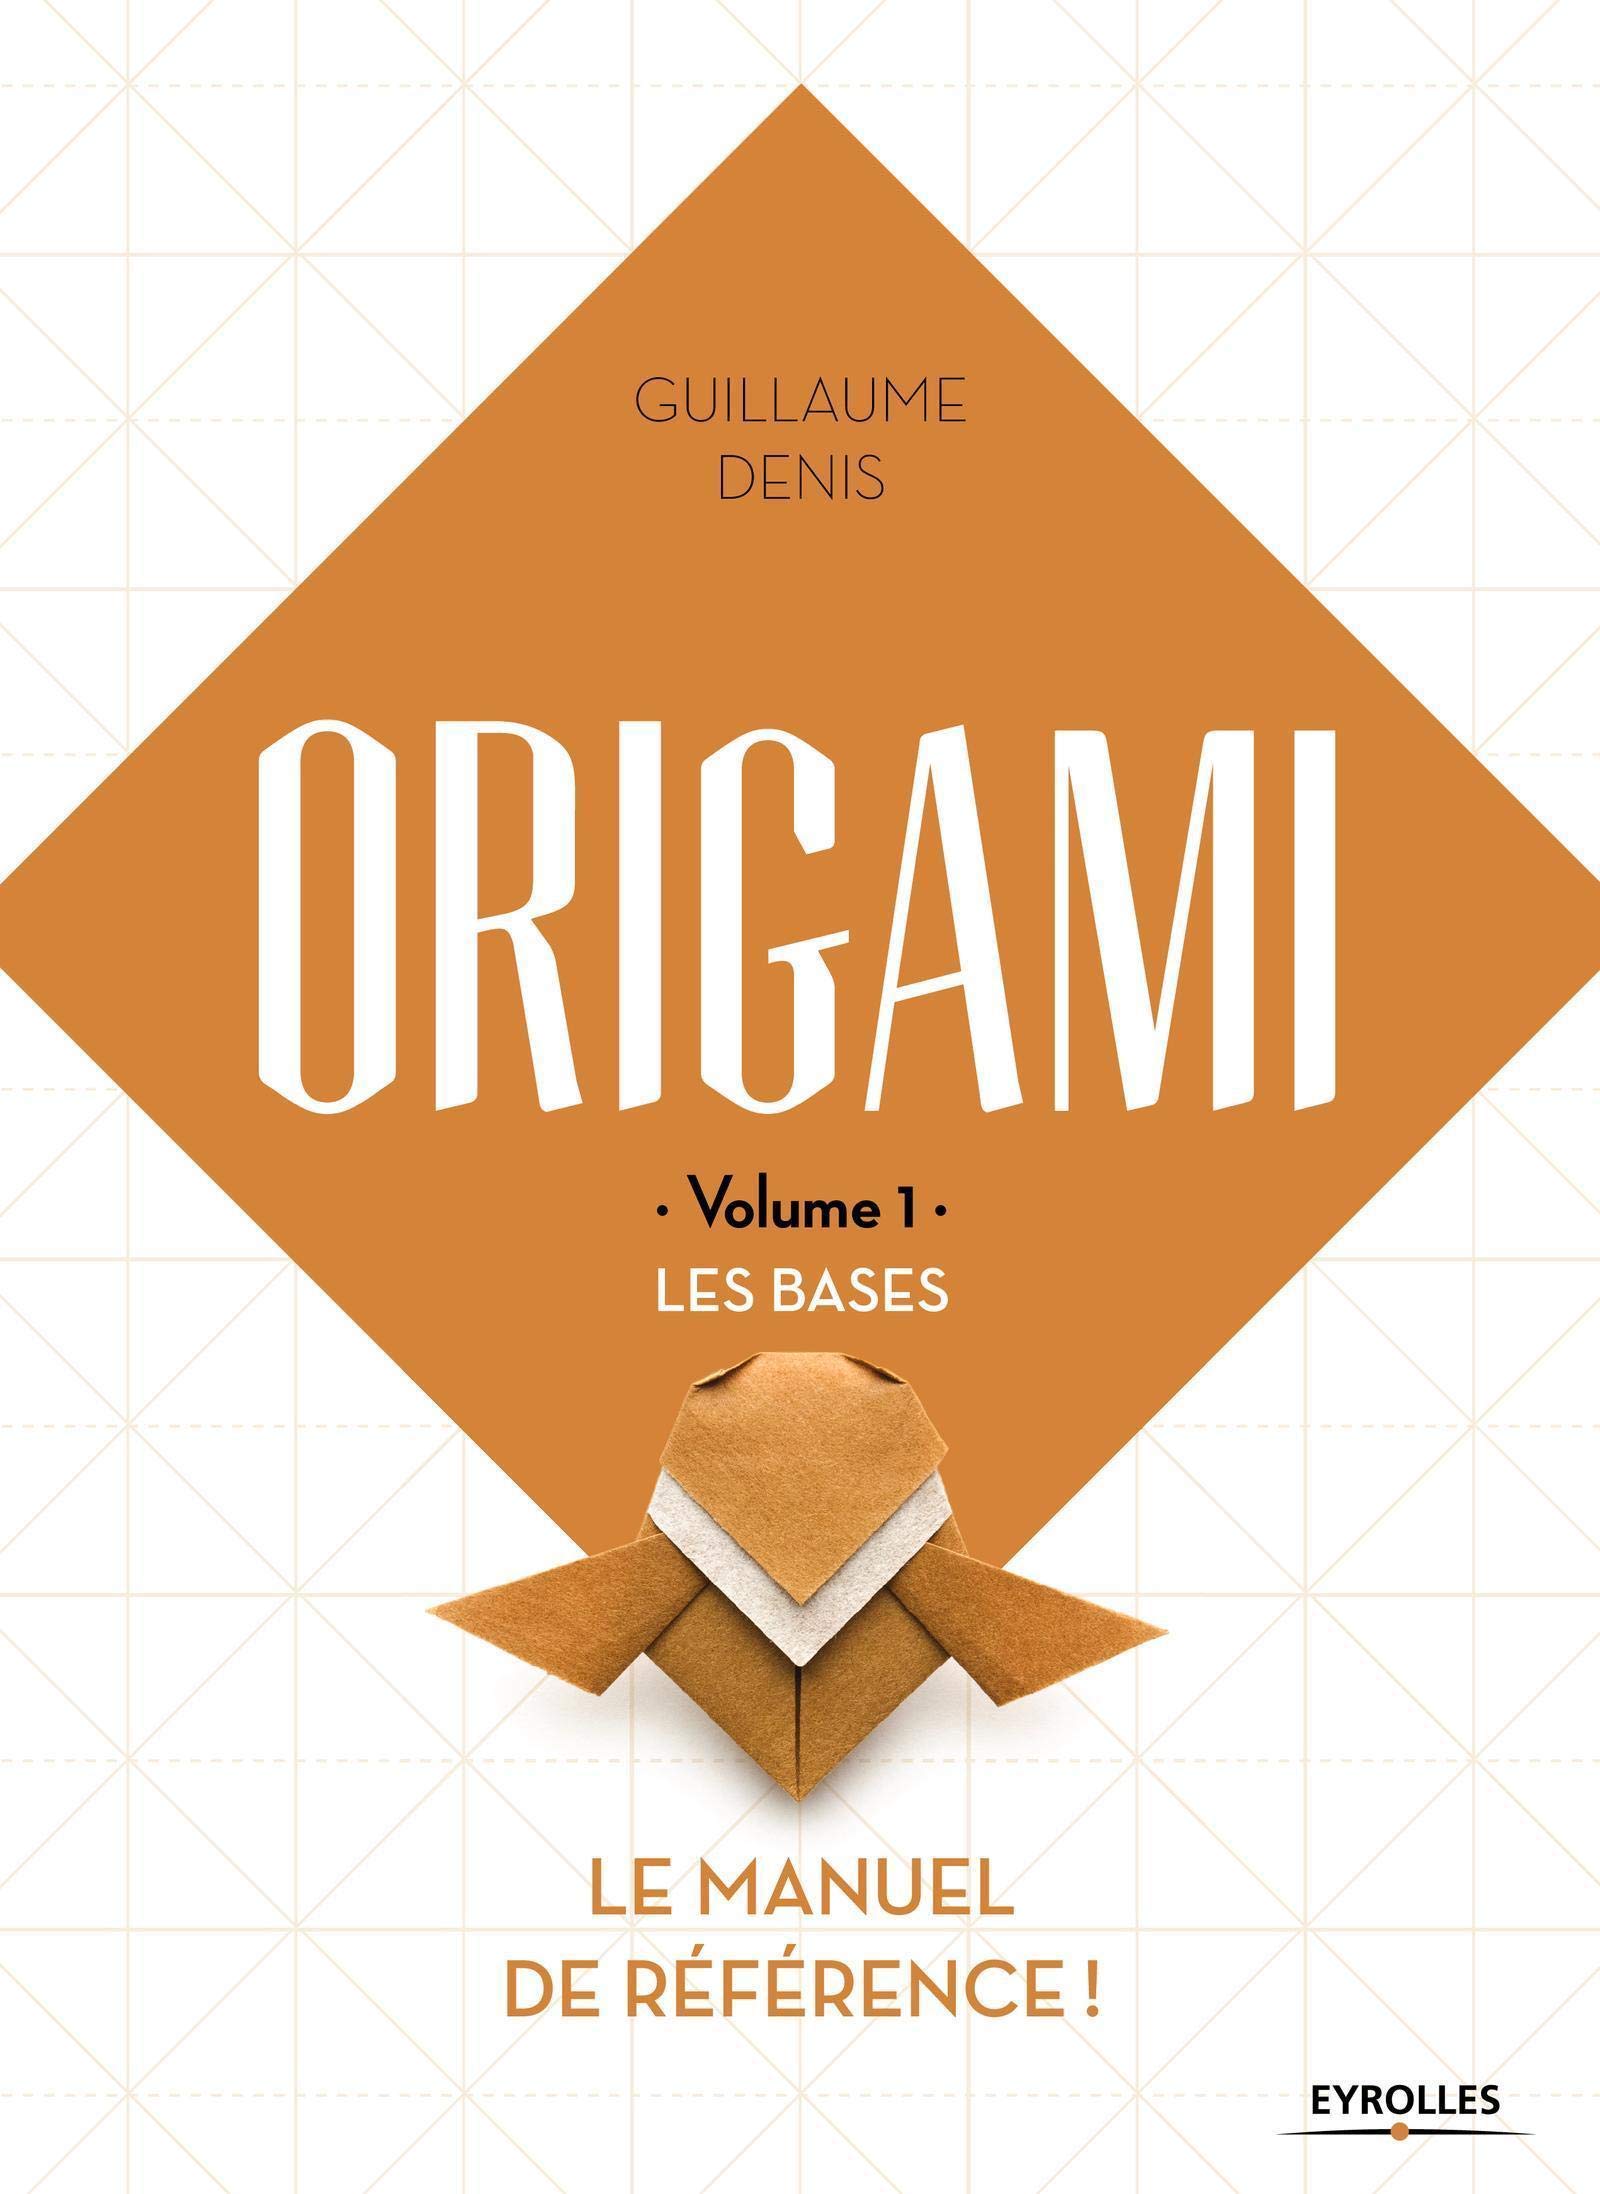 ORIGAMI - Volume 1 - LES BASES : page 95.